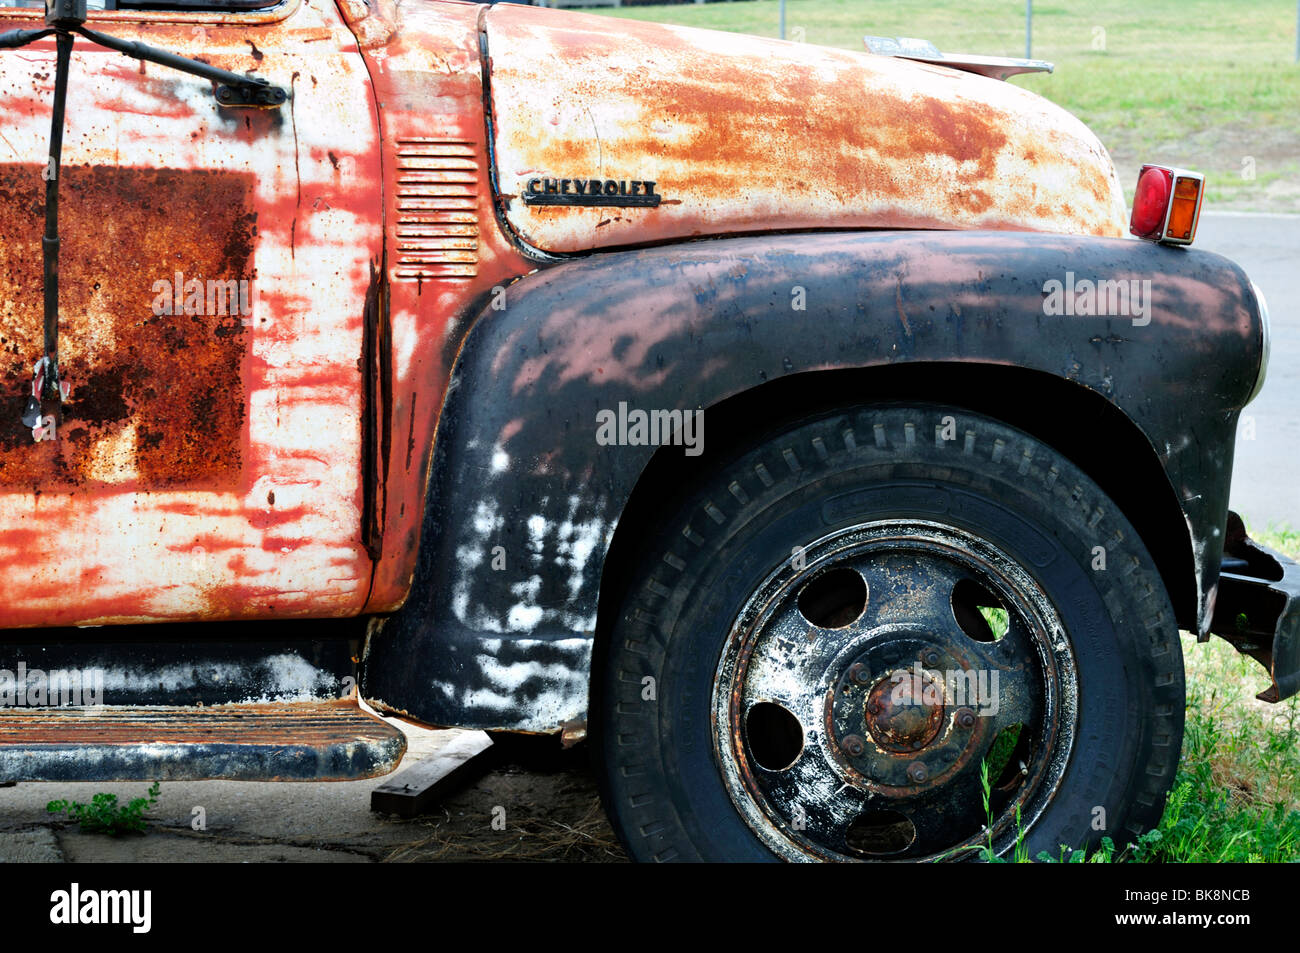 The cab and front fender of an old Chevrolet truck. Oklahoma City, Oklahoma, USA. Stock Photo